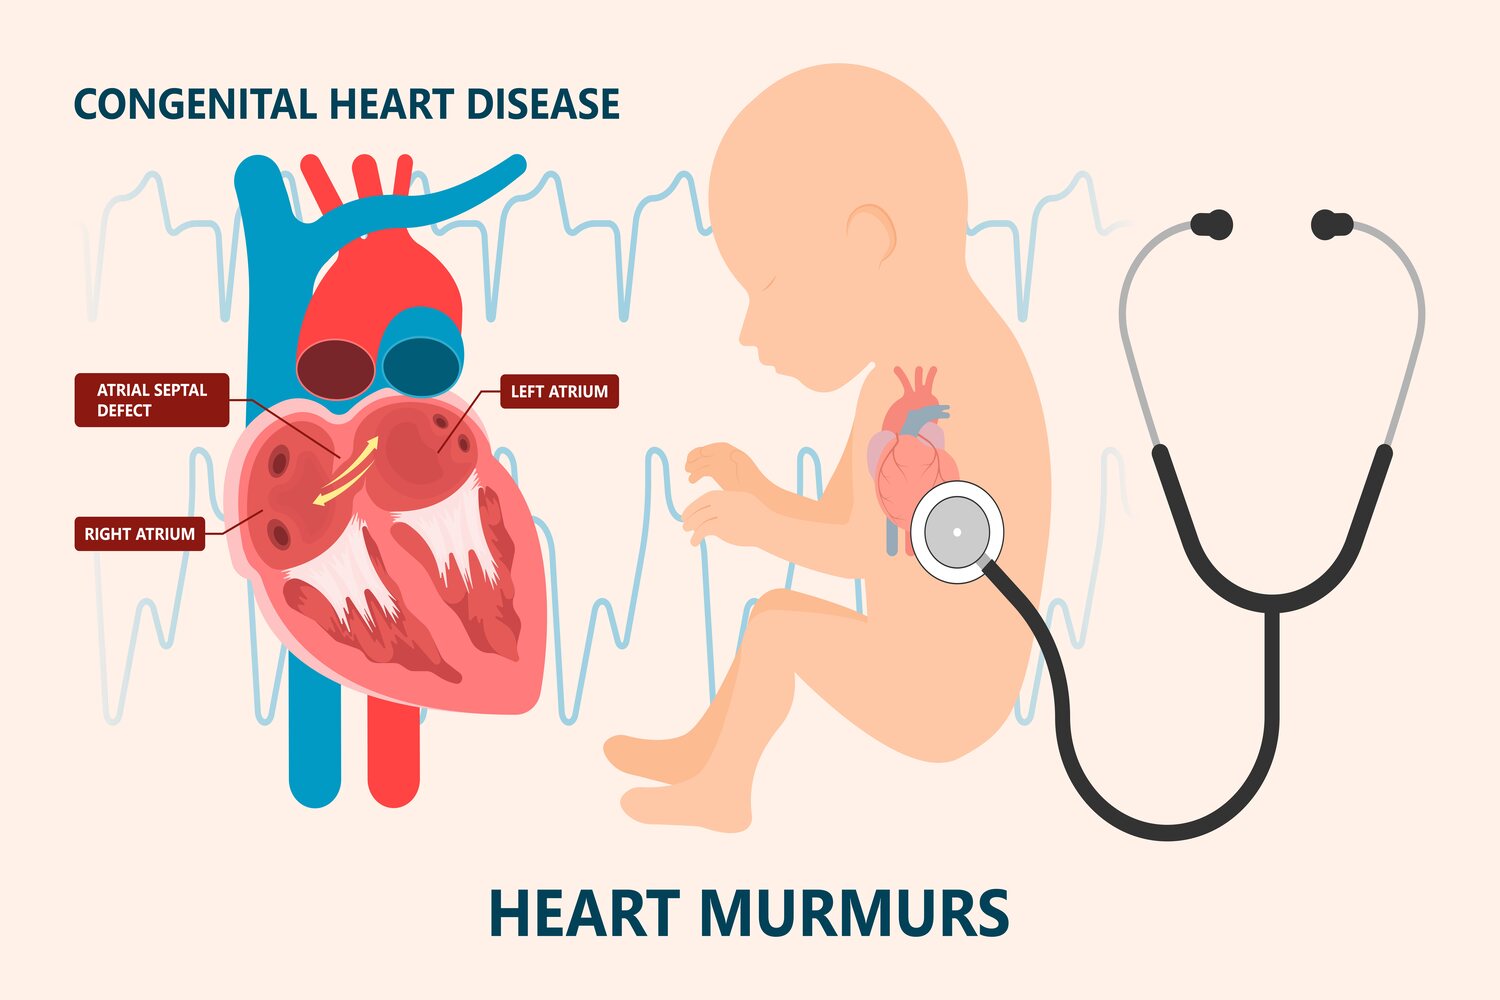 Heart murmur can be sign of an underlying condition